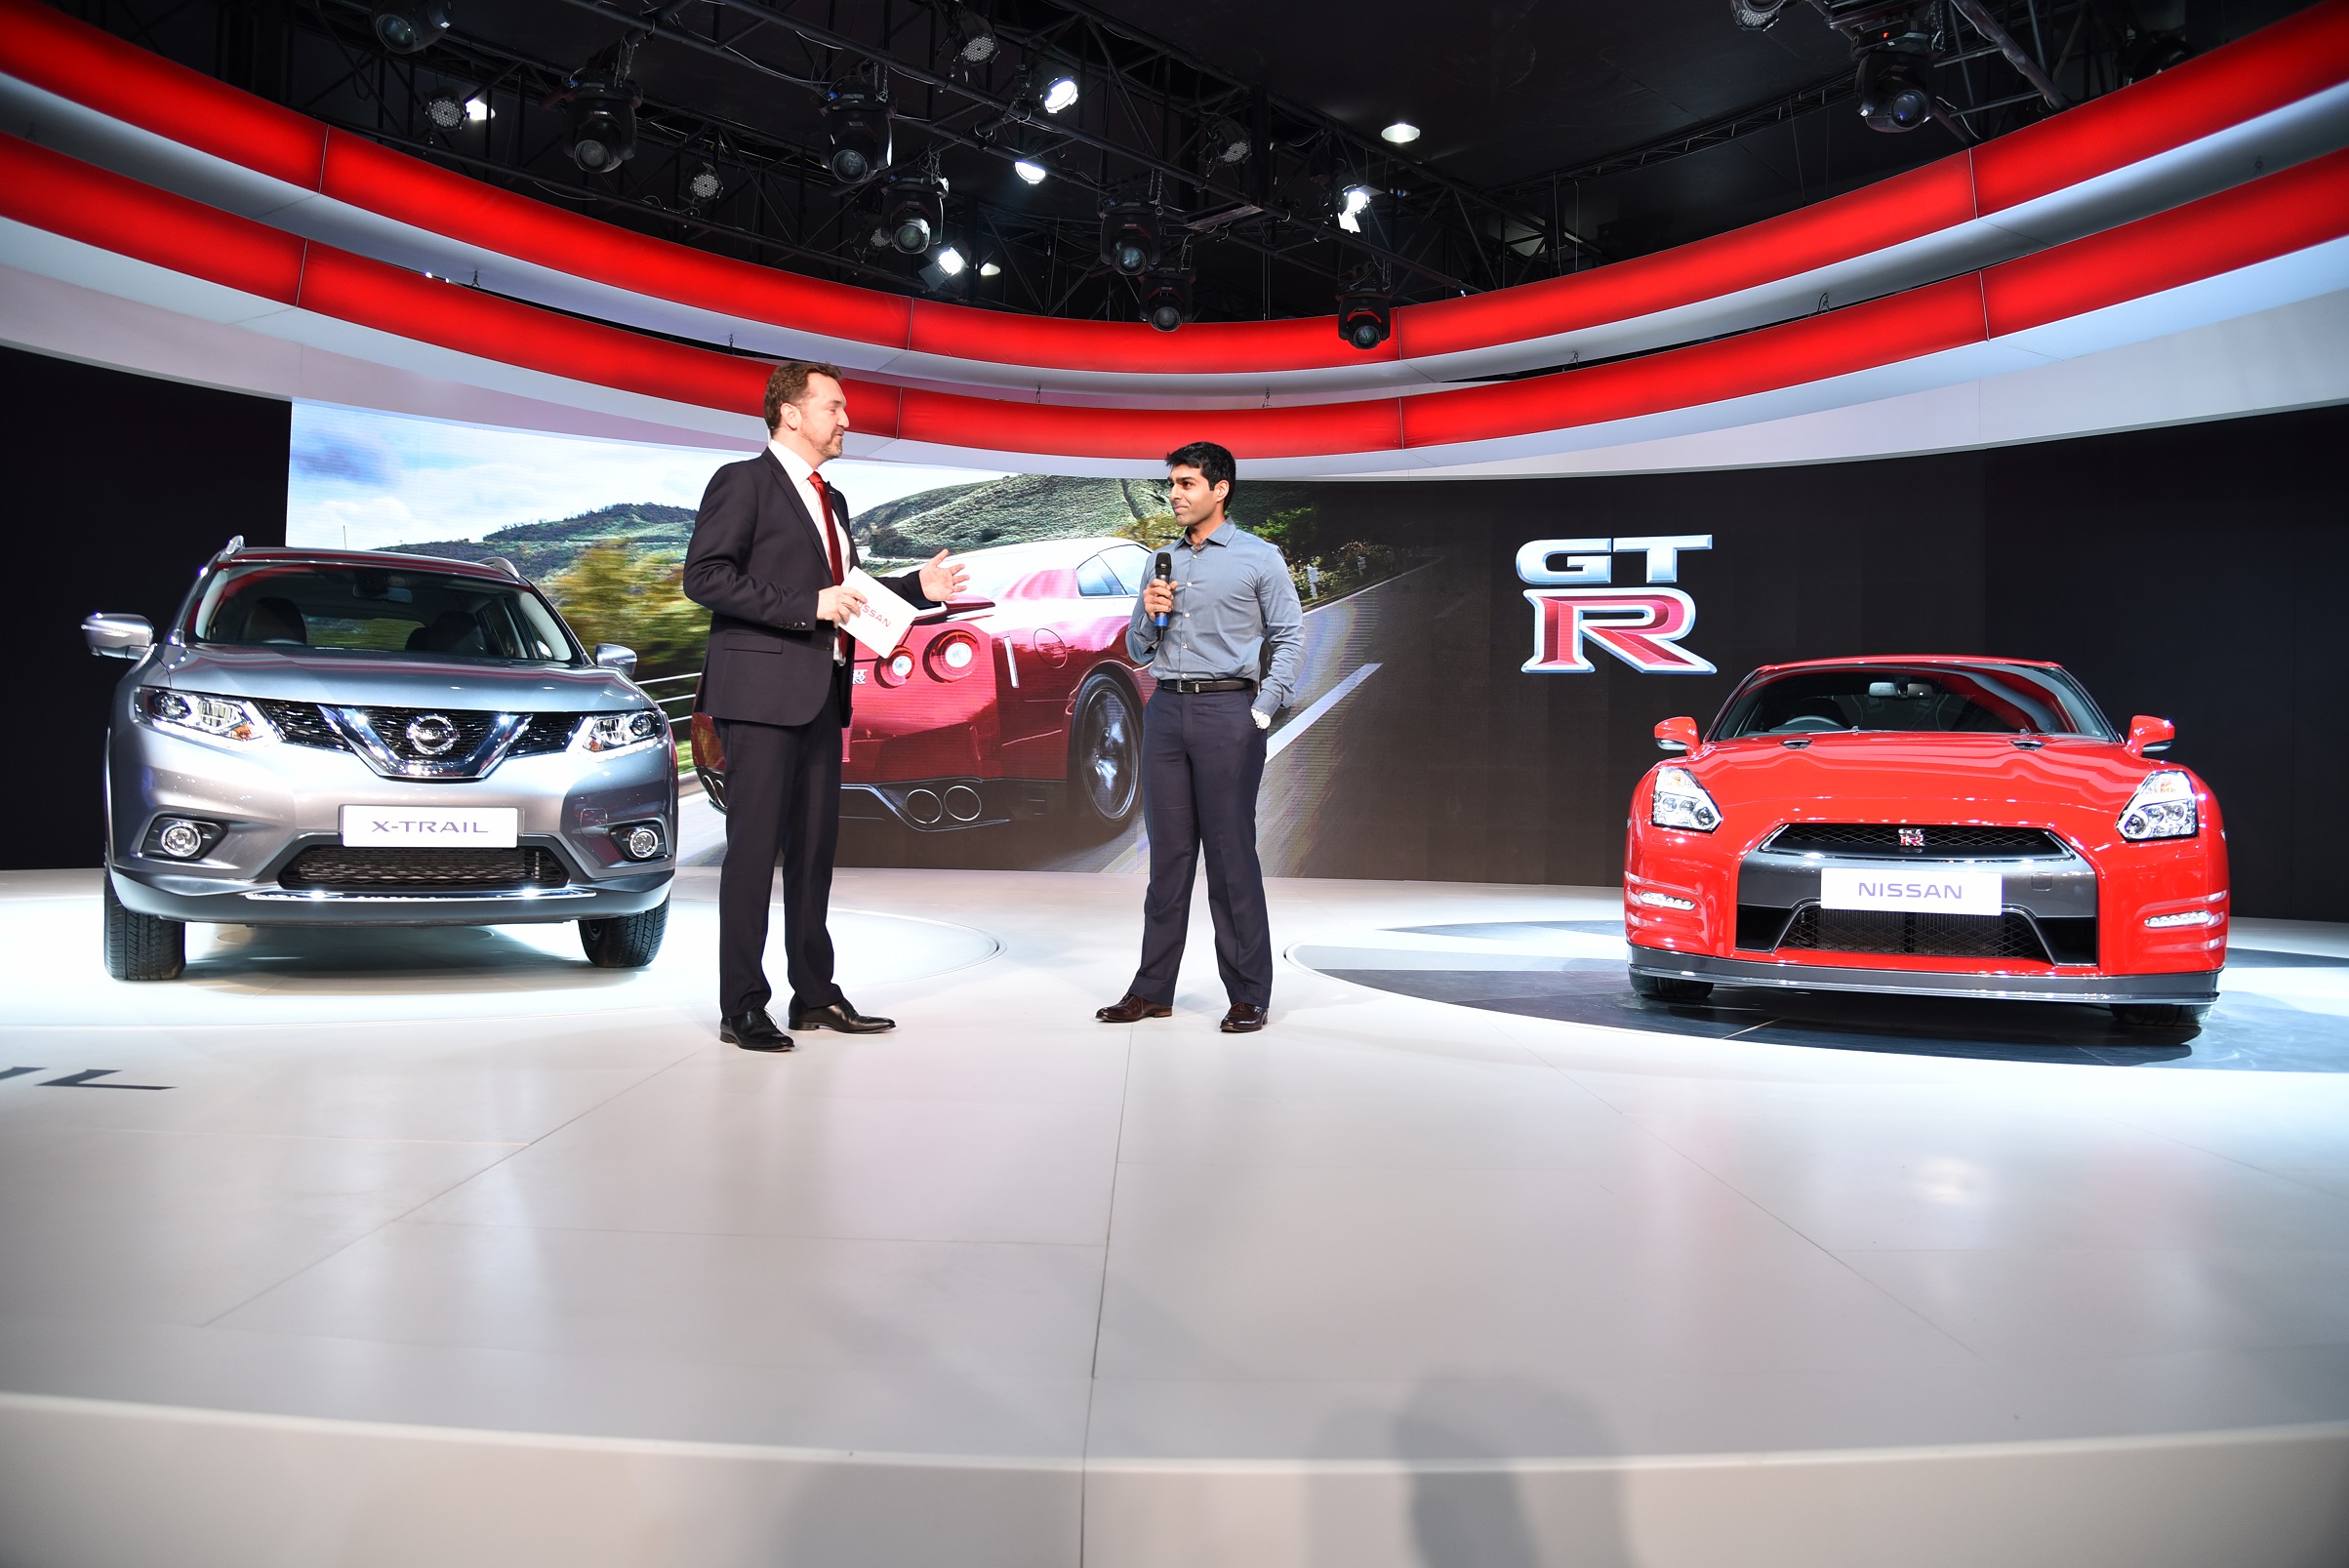 Picture 3 – Guillaume Sicard – President, Nissan India Operations along with F1 rally driver Karun Chandhok at the showcase of X-Trail and GT-R in India